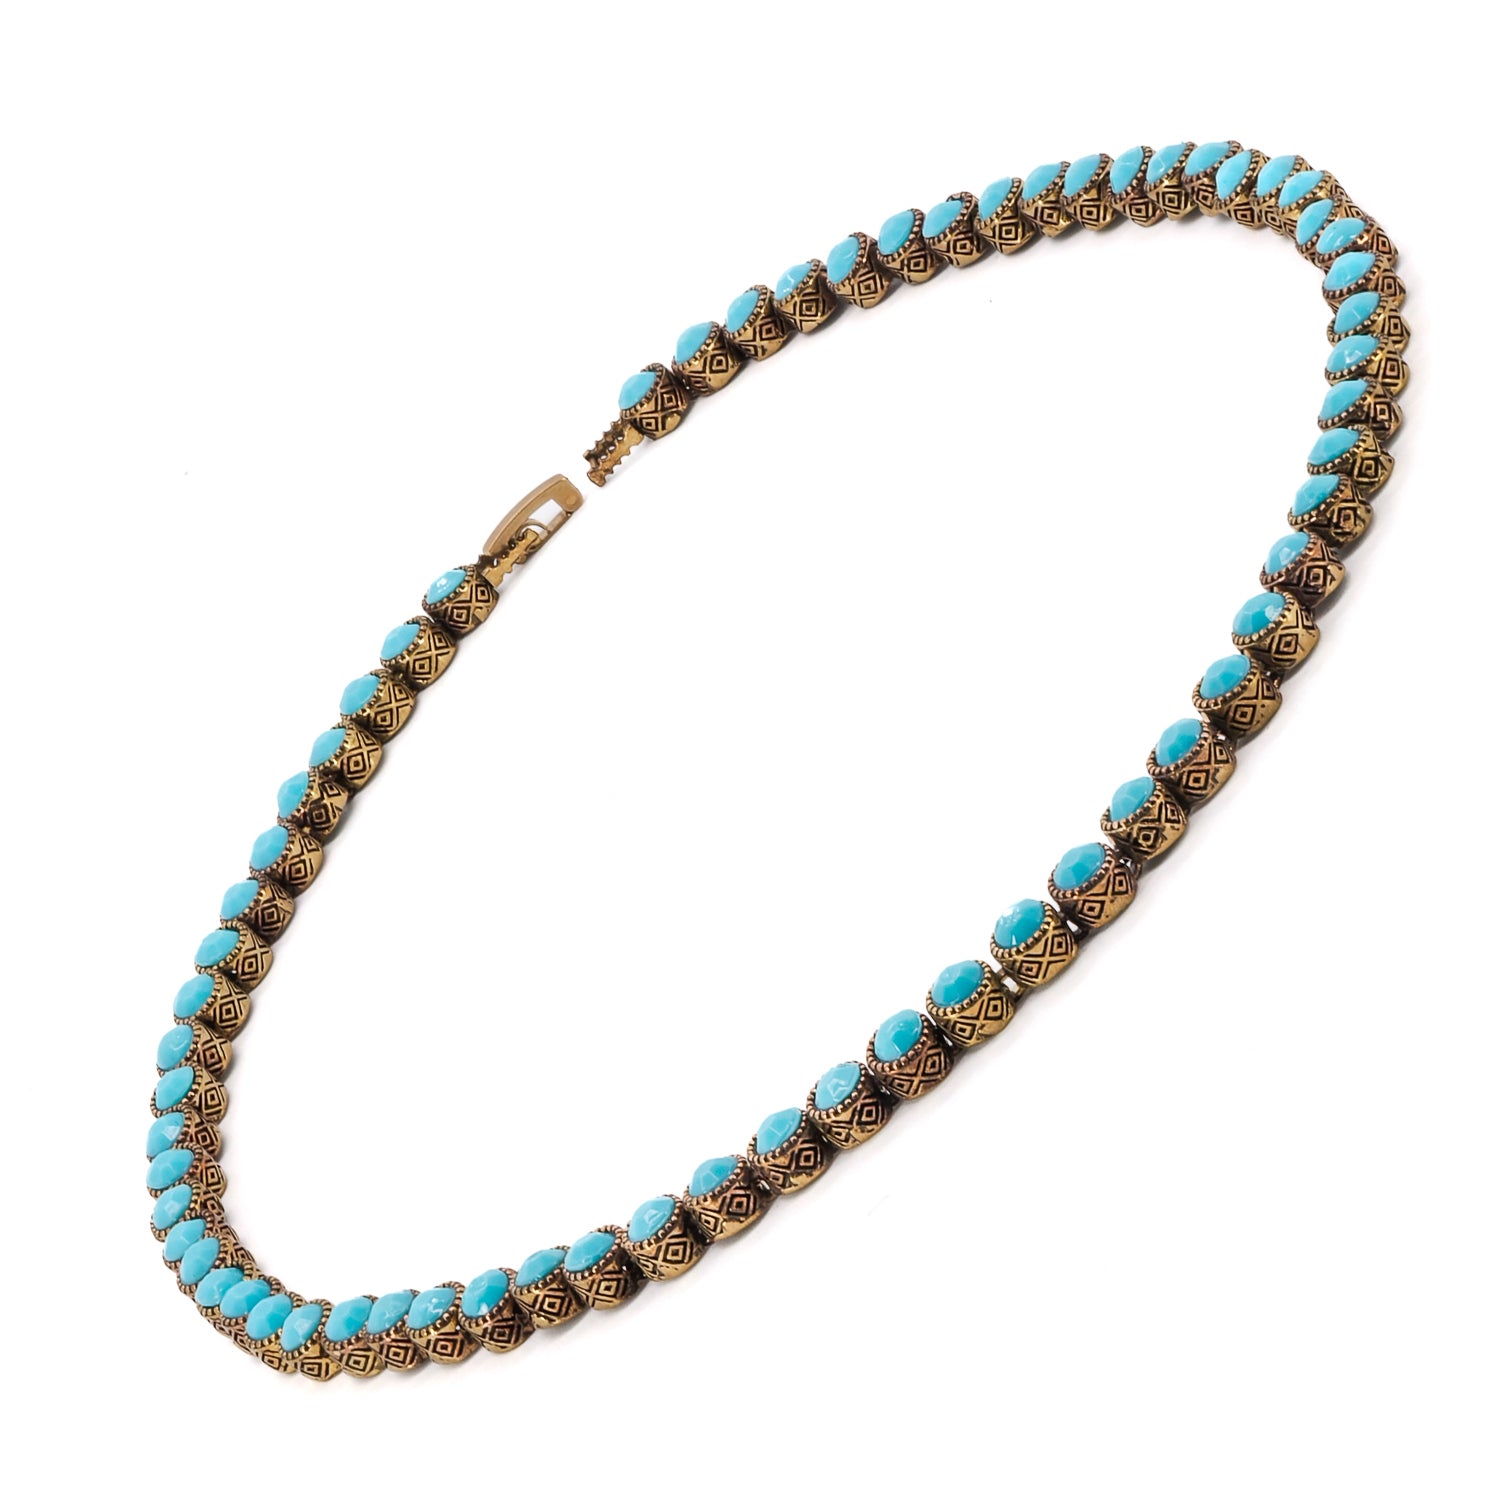 Experience the transformative power of turquoise with this eye-catching handmade necklace, a symbol of positivity and spiritual growth.